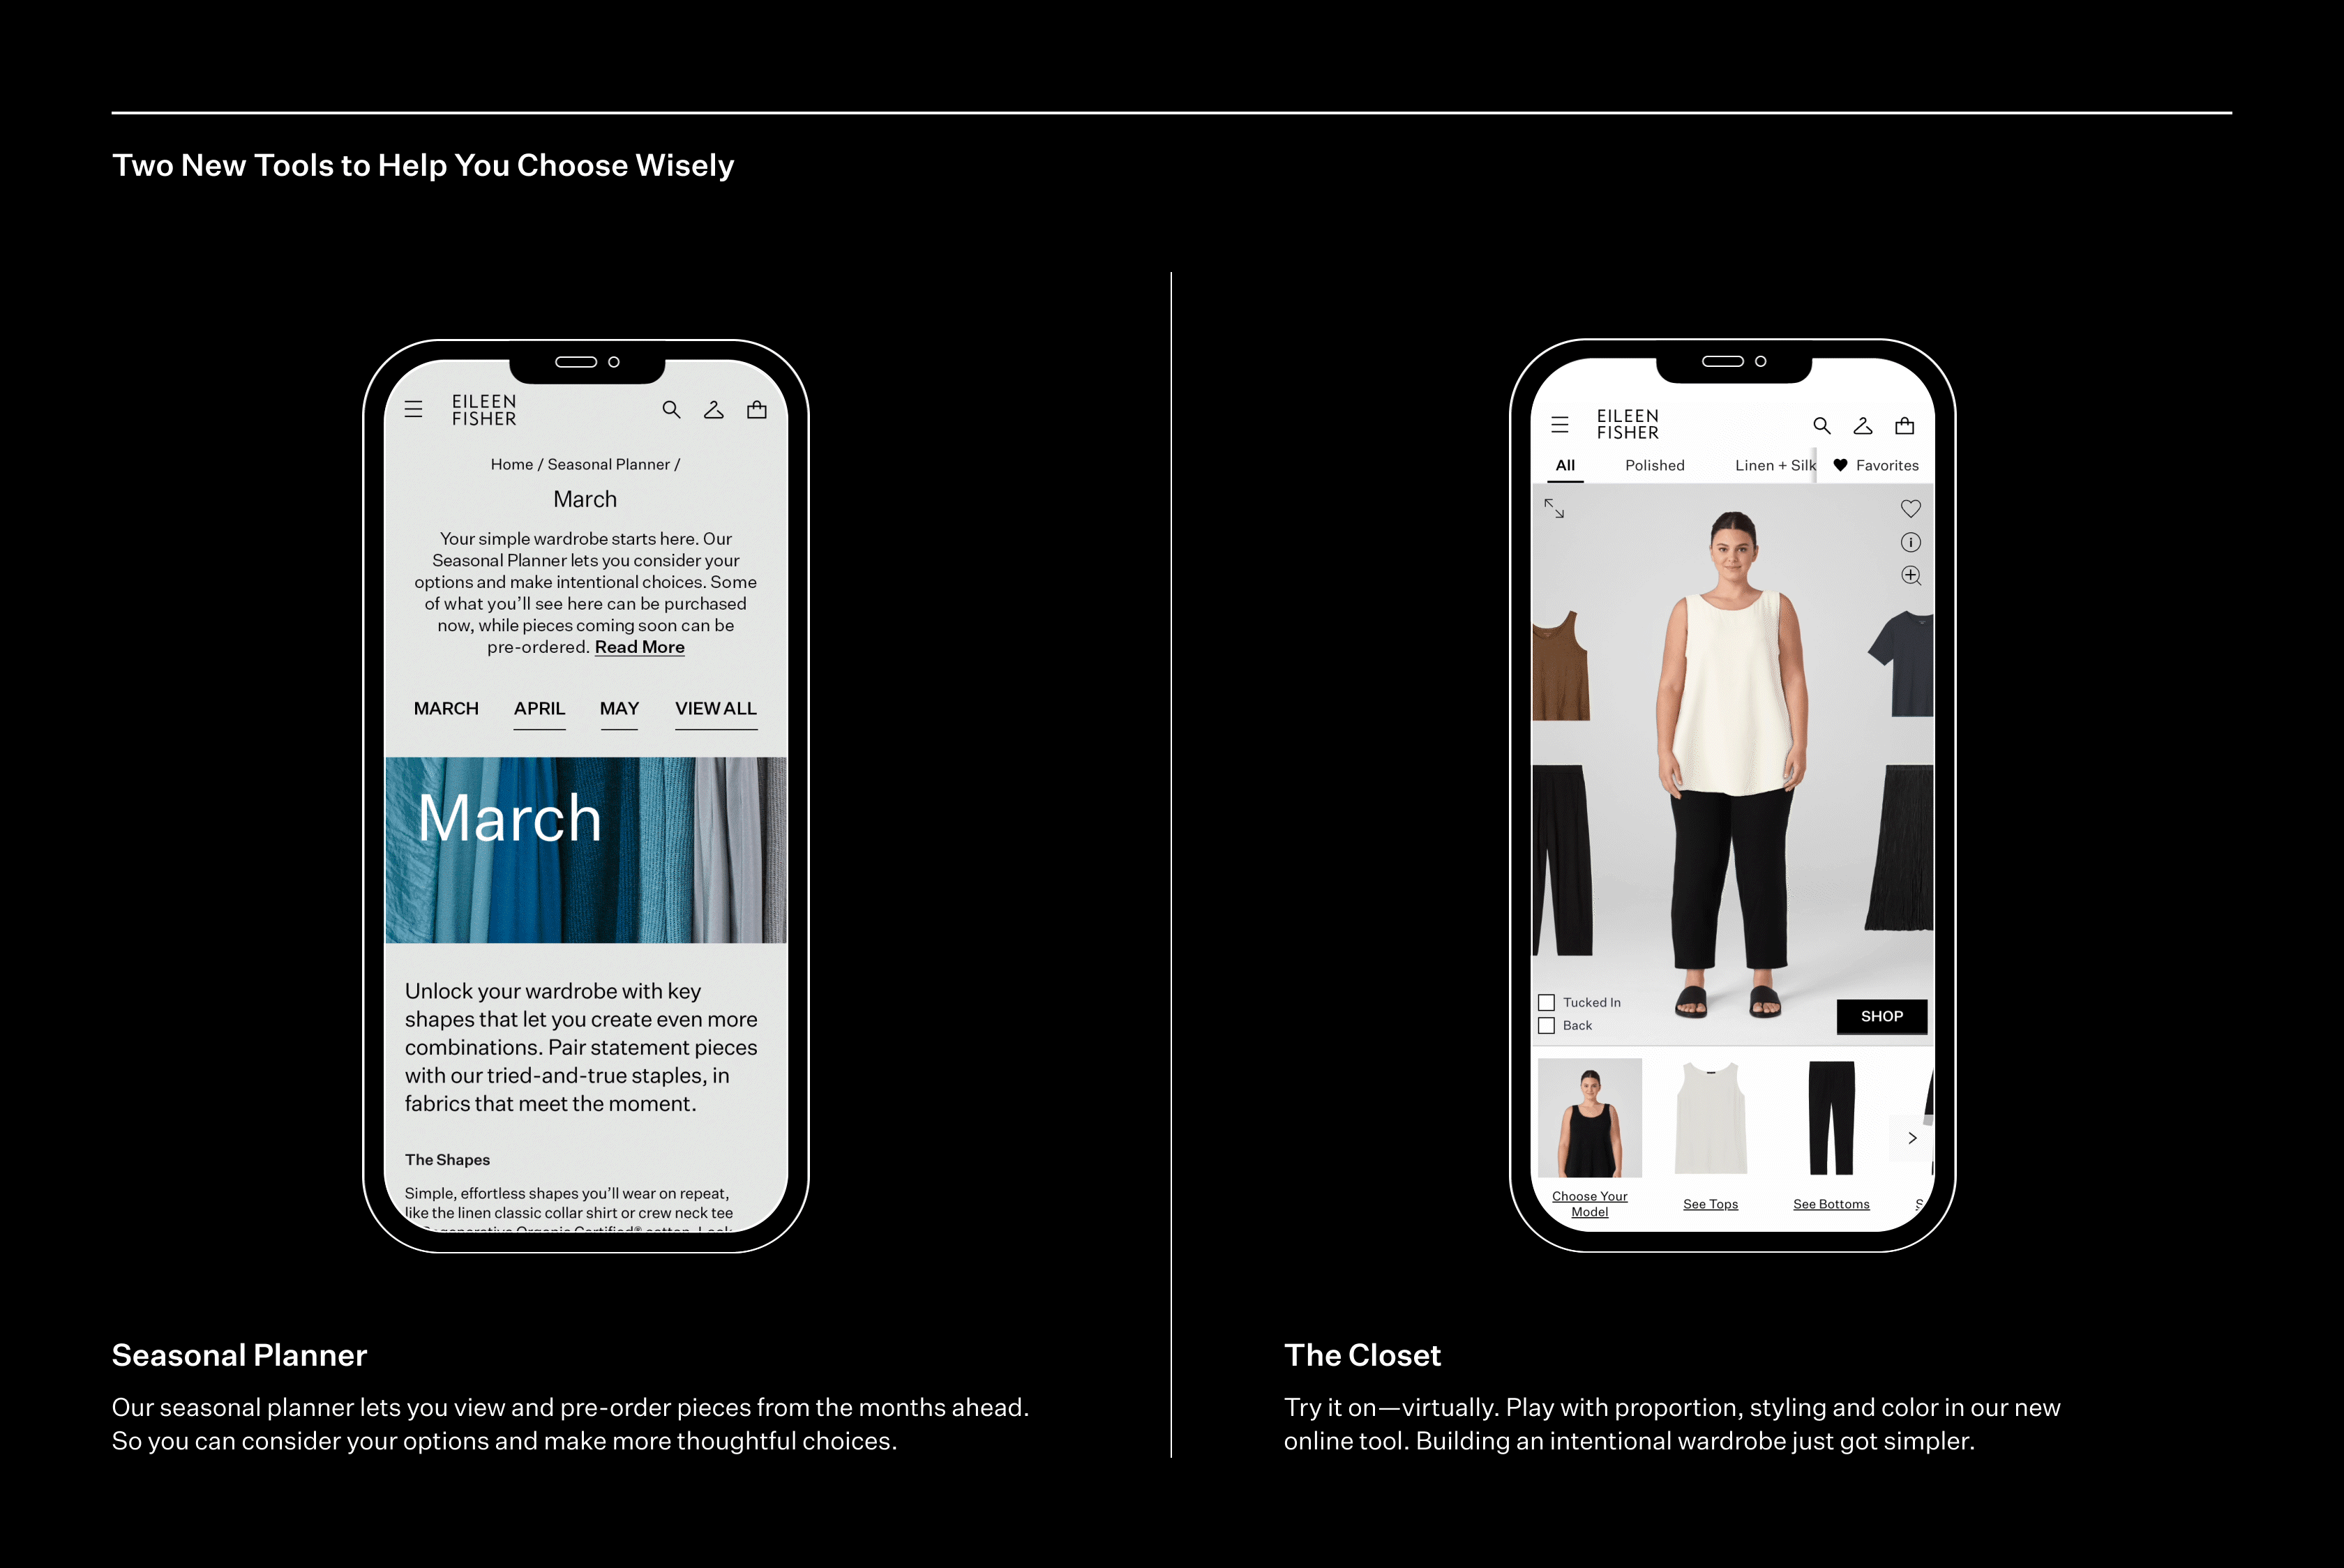 Animated Image of phone screens showing online tools to build an intentional wardrobe.